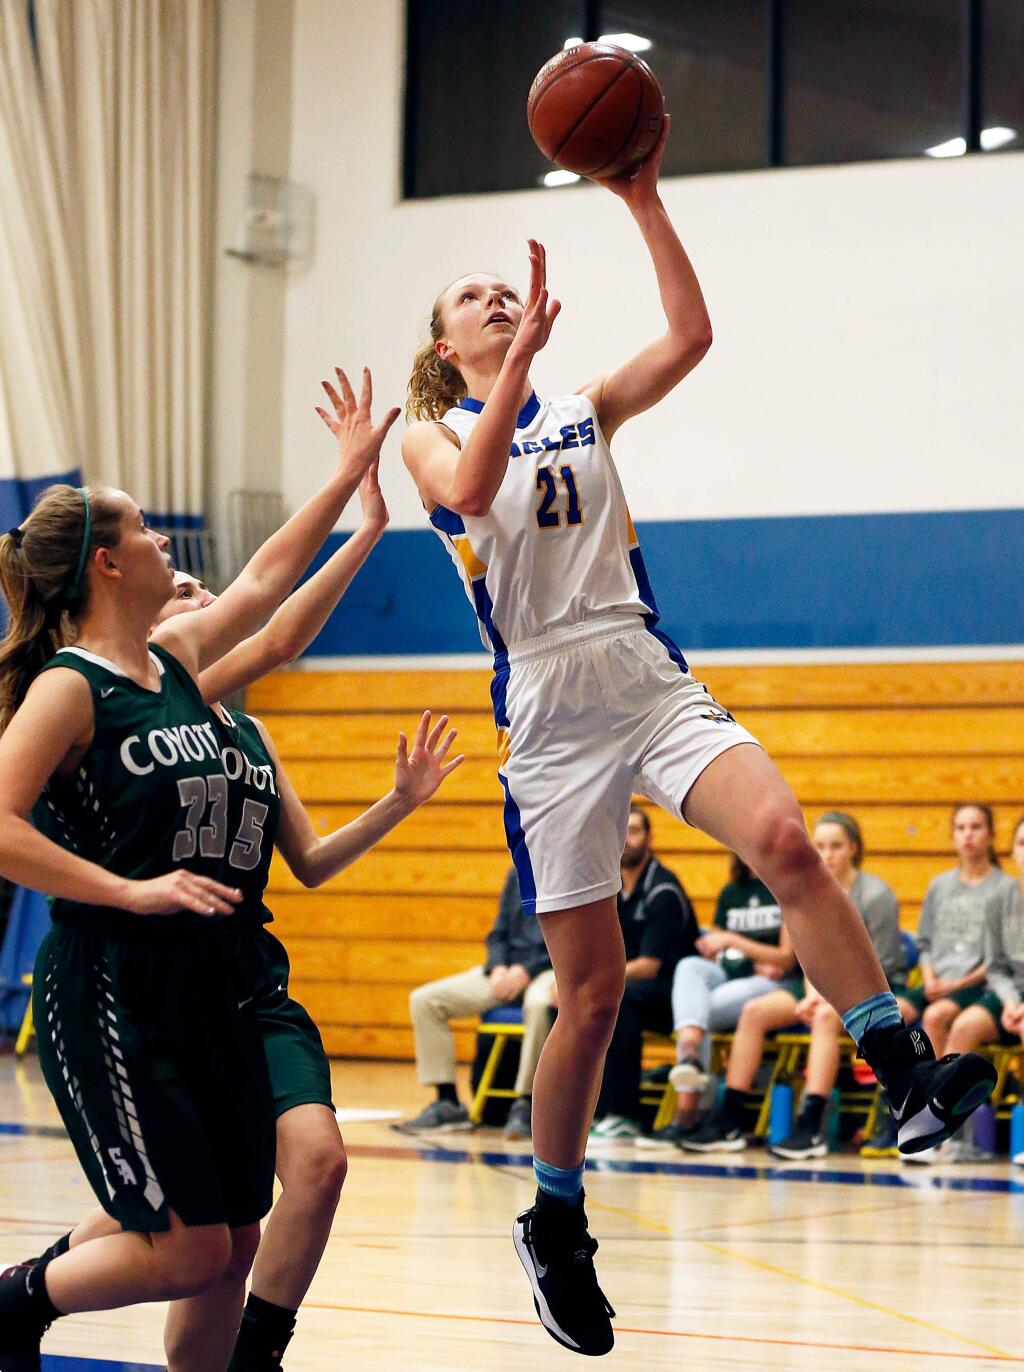 Rincon Valley Christian's Caroline Chambers (21), right, scores with a layup during the first half of a girls varsity basketball game between Sonoma Academy and Rincon Valley Christian high schools in Santa Rosa, California, on Thursday, January 17, 2019. (Alvin Jornada / The Press Democrat)